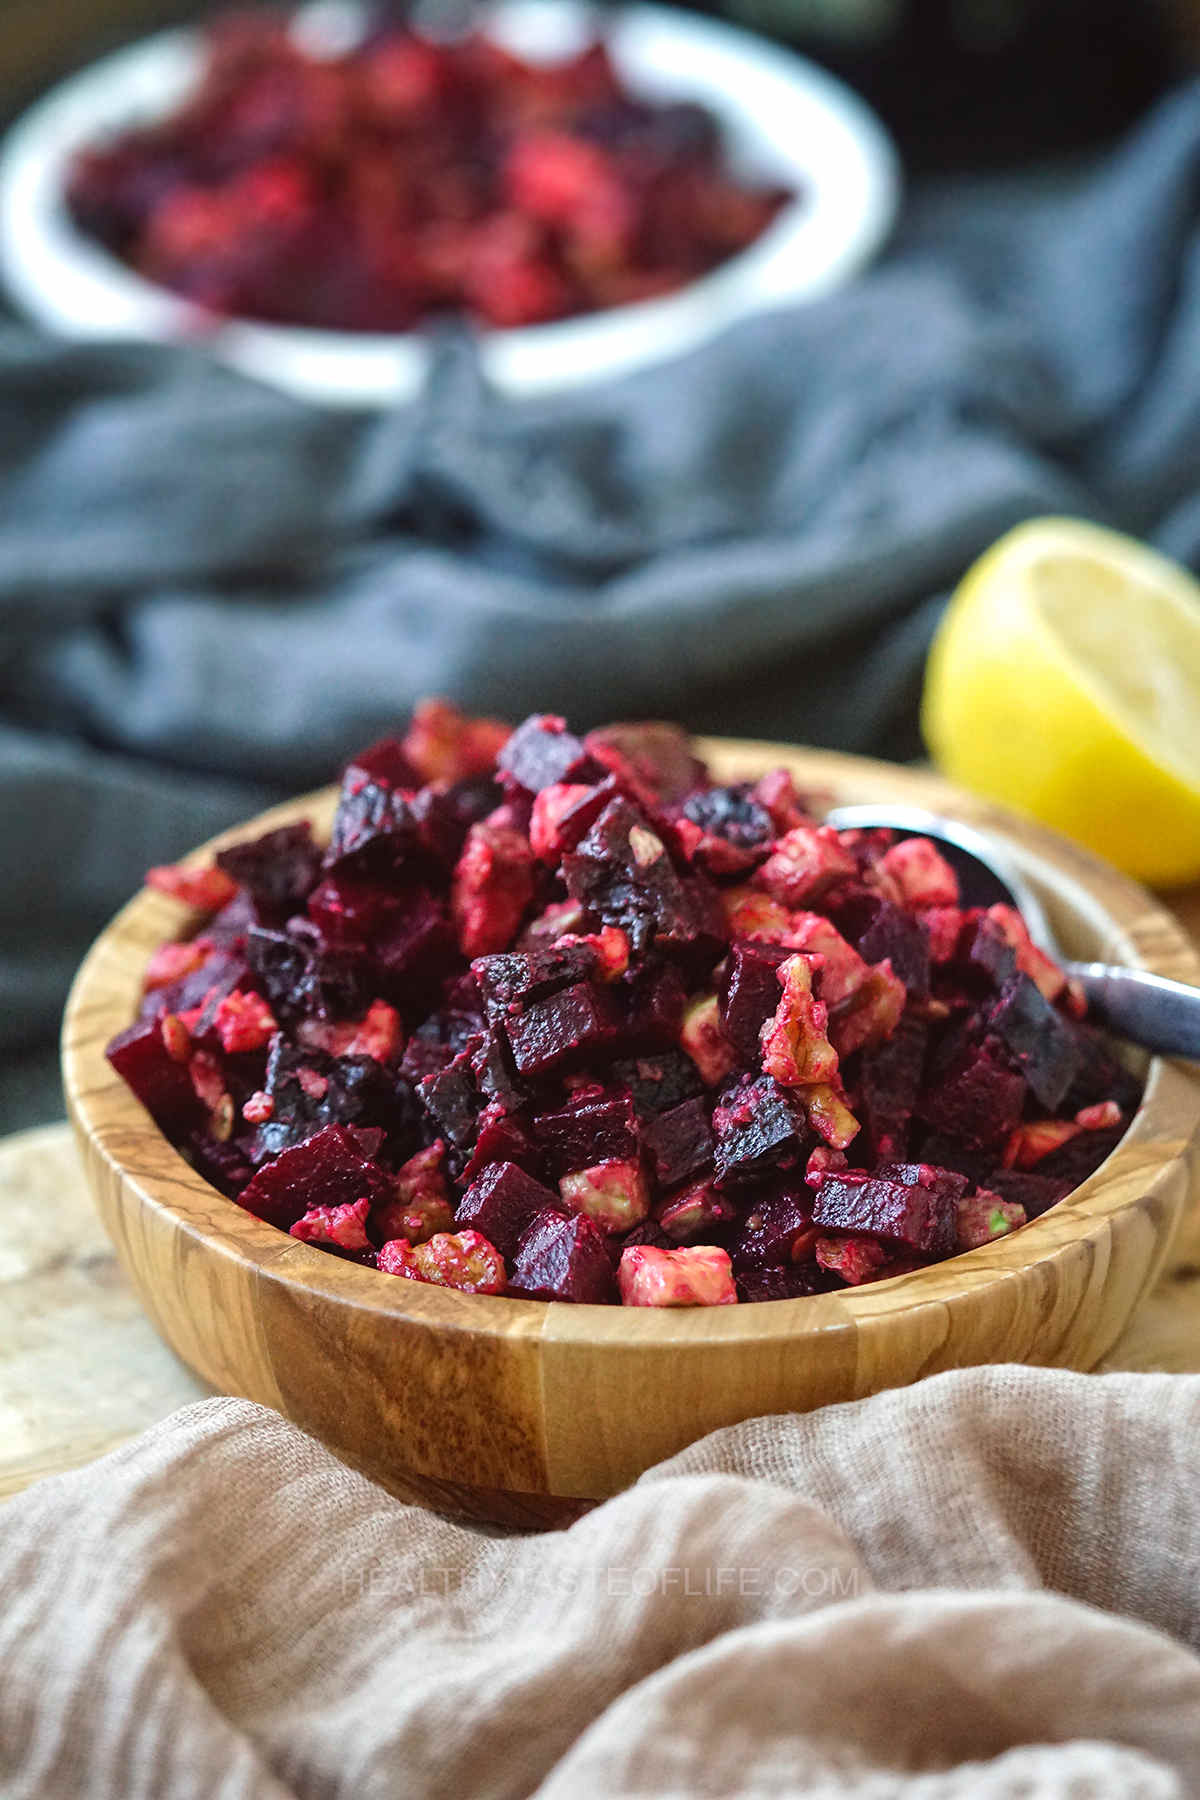 Sweet earthy beets with crunchy walnuts and prunes and lots of creamy avocado for a simple salad with Eastern European style - Russian beet salad.